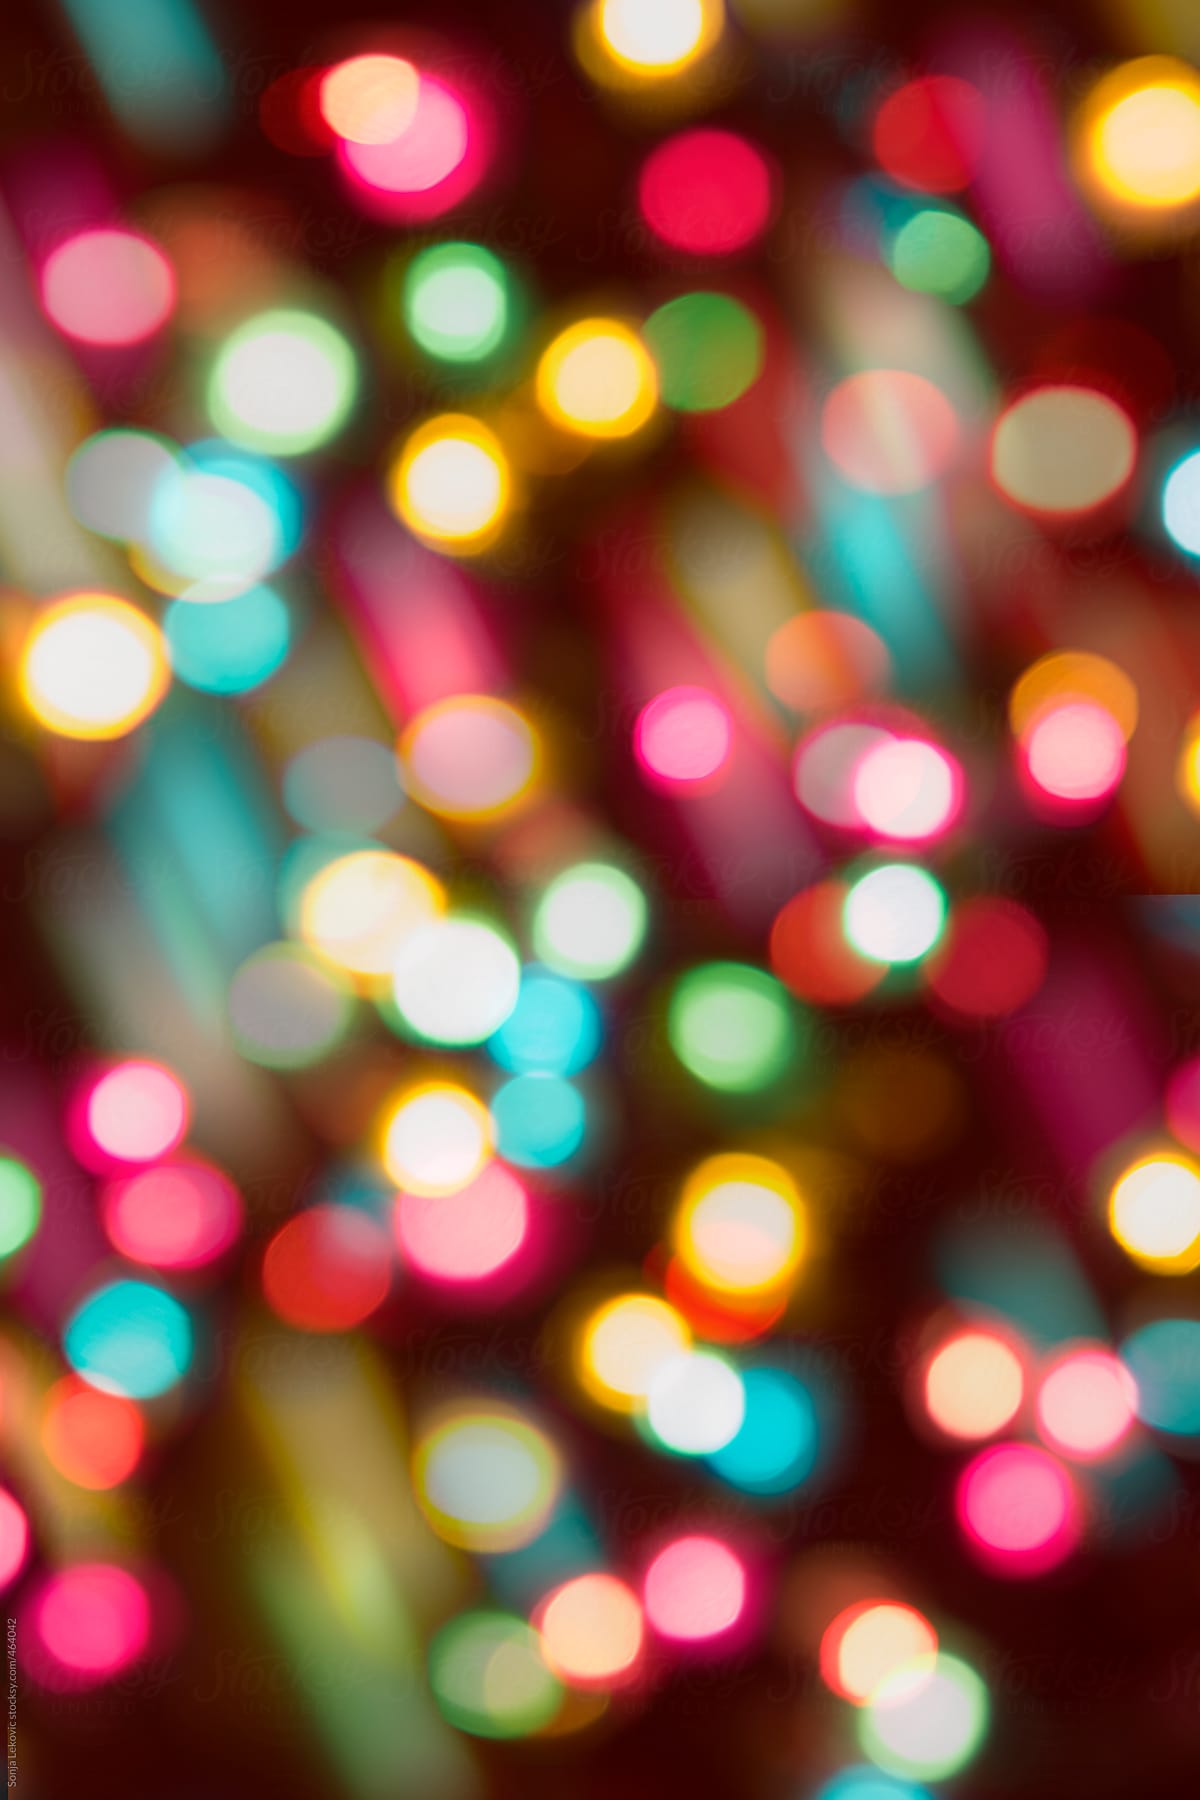 Colorful Party Lights In Blur Background | Stocksy United